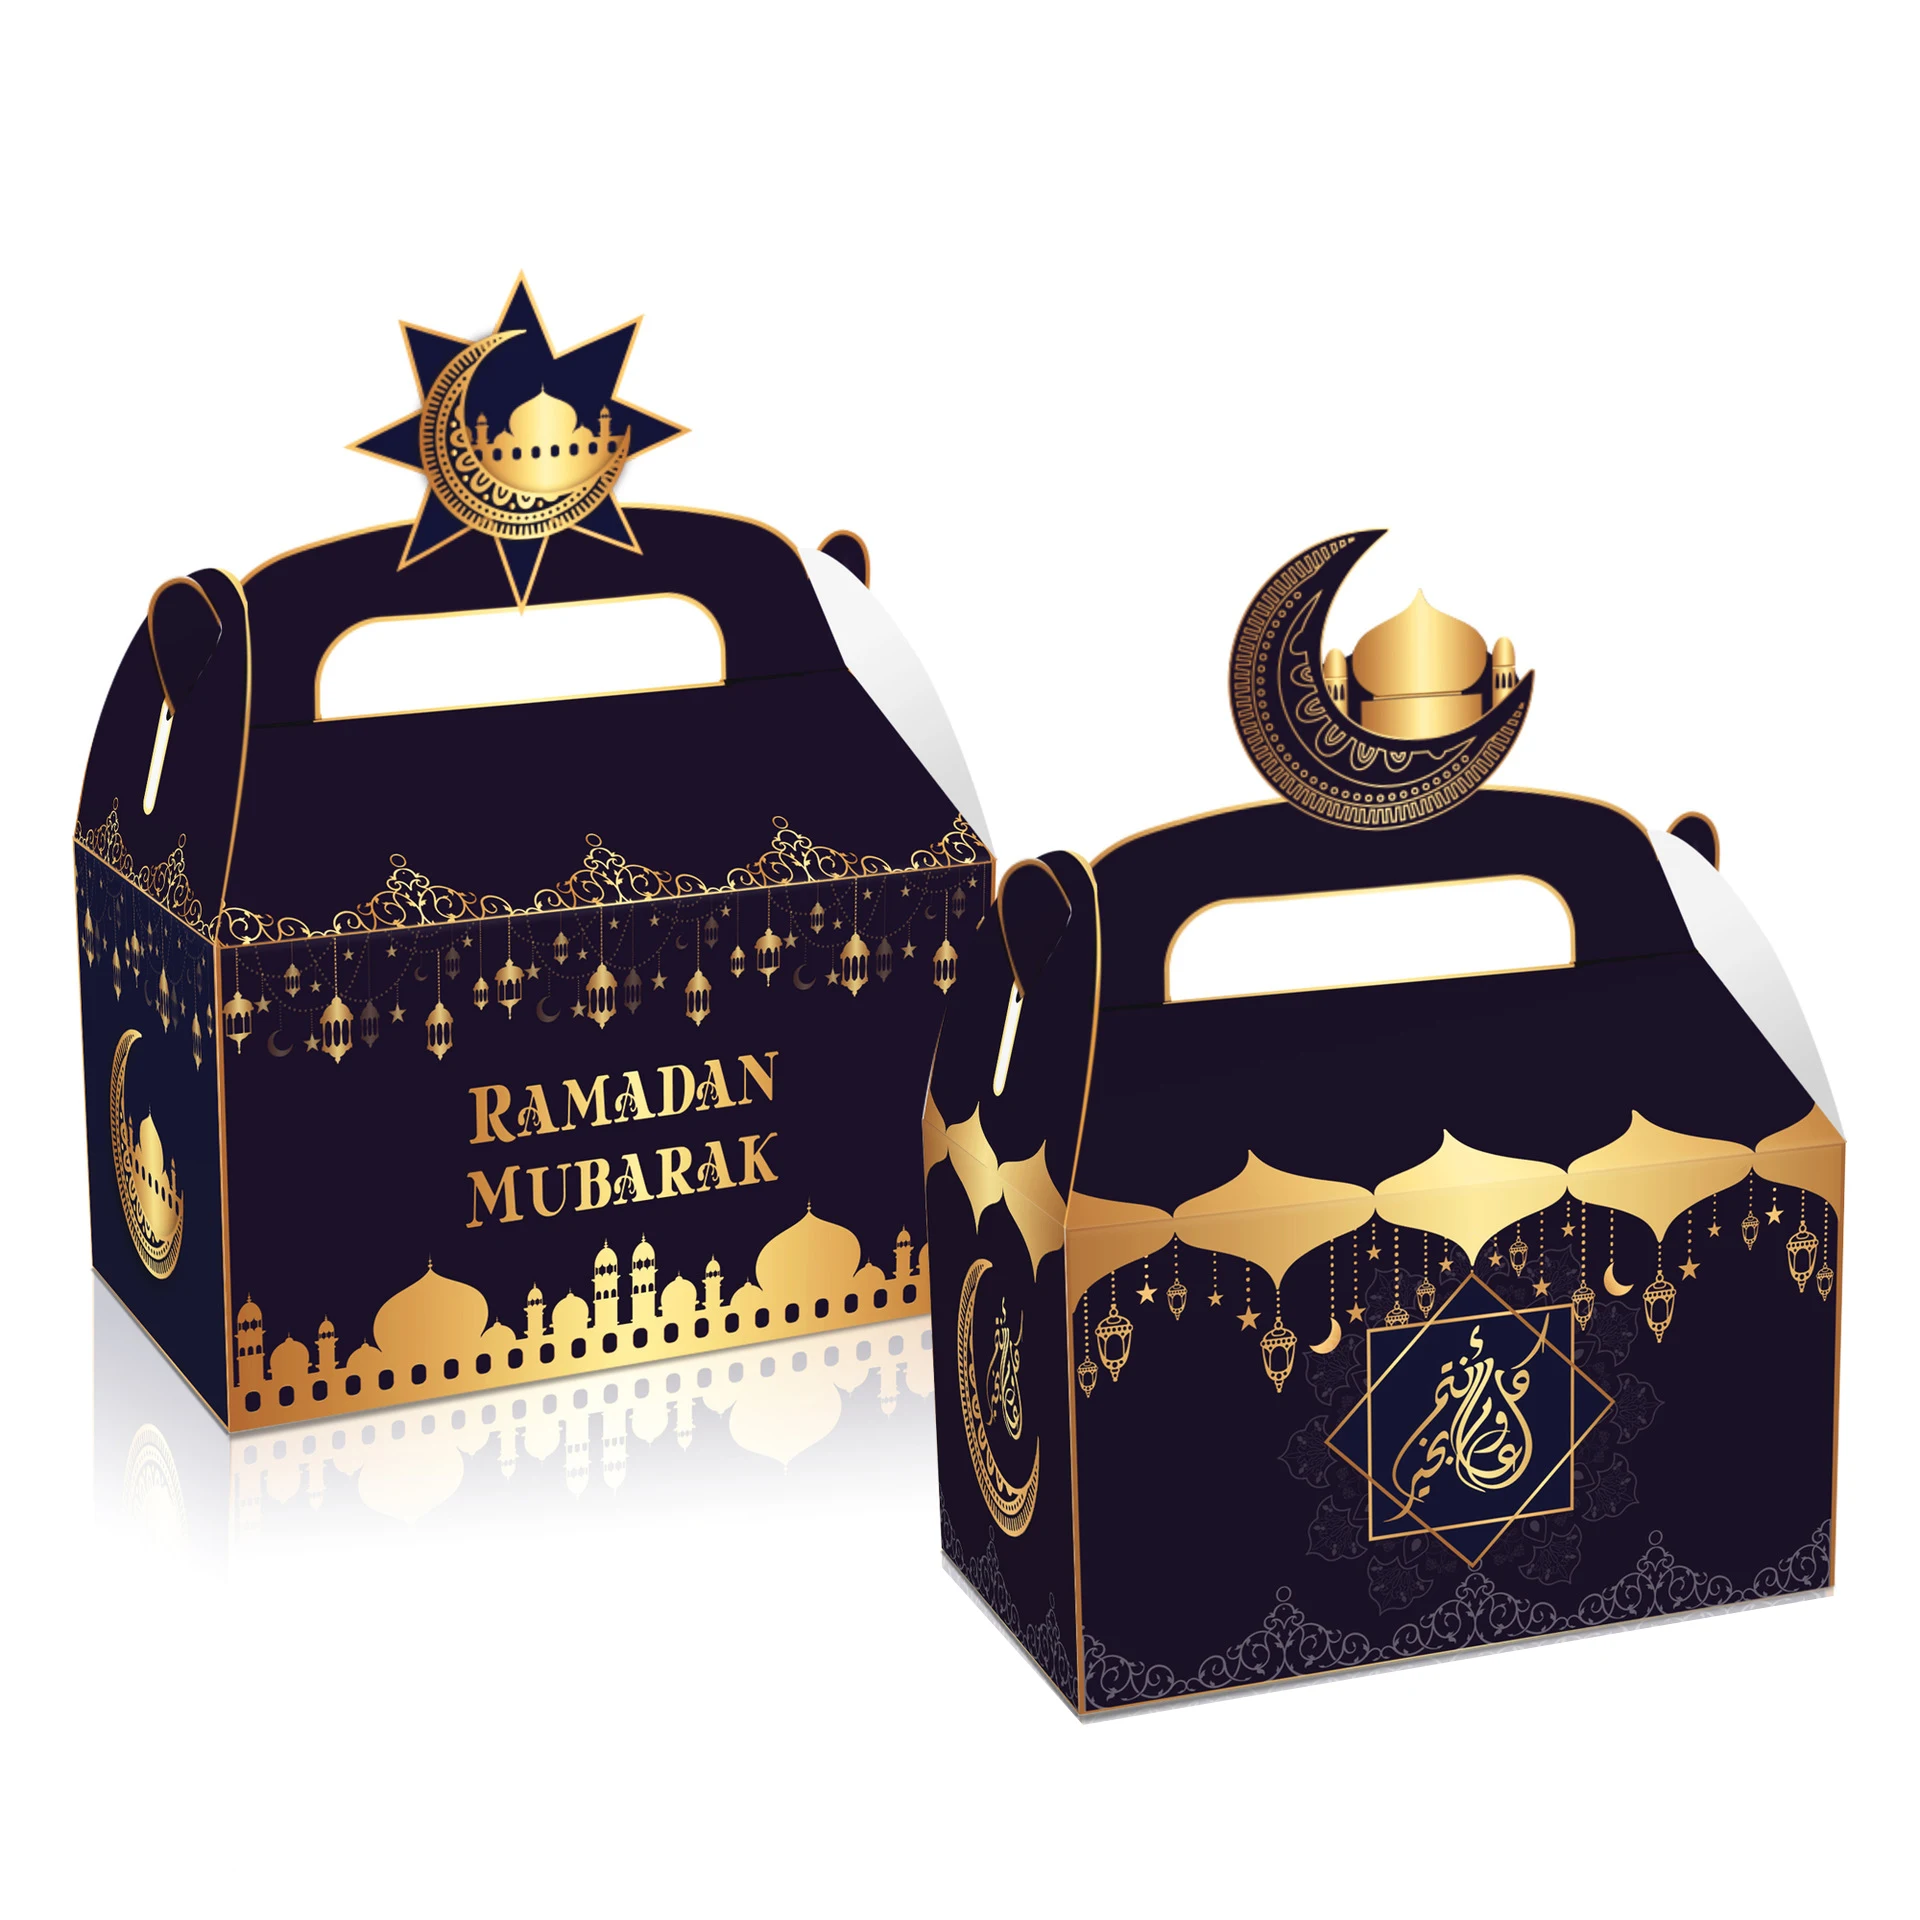 Personalized Ramadan Gift Set For Him: Gift/Send Home and Living Gifts  Online JVS1276891 |IGP.com